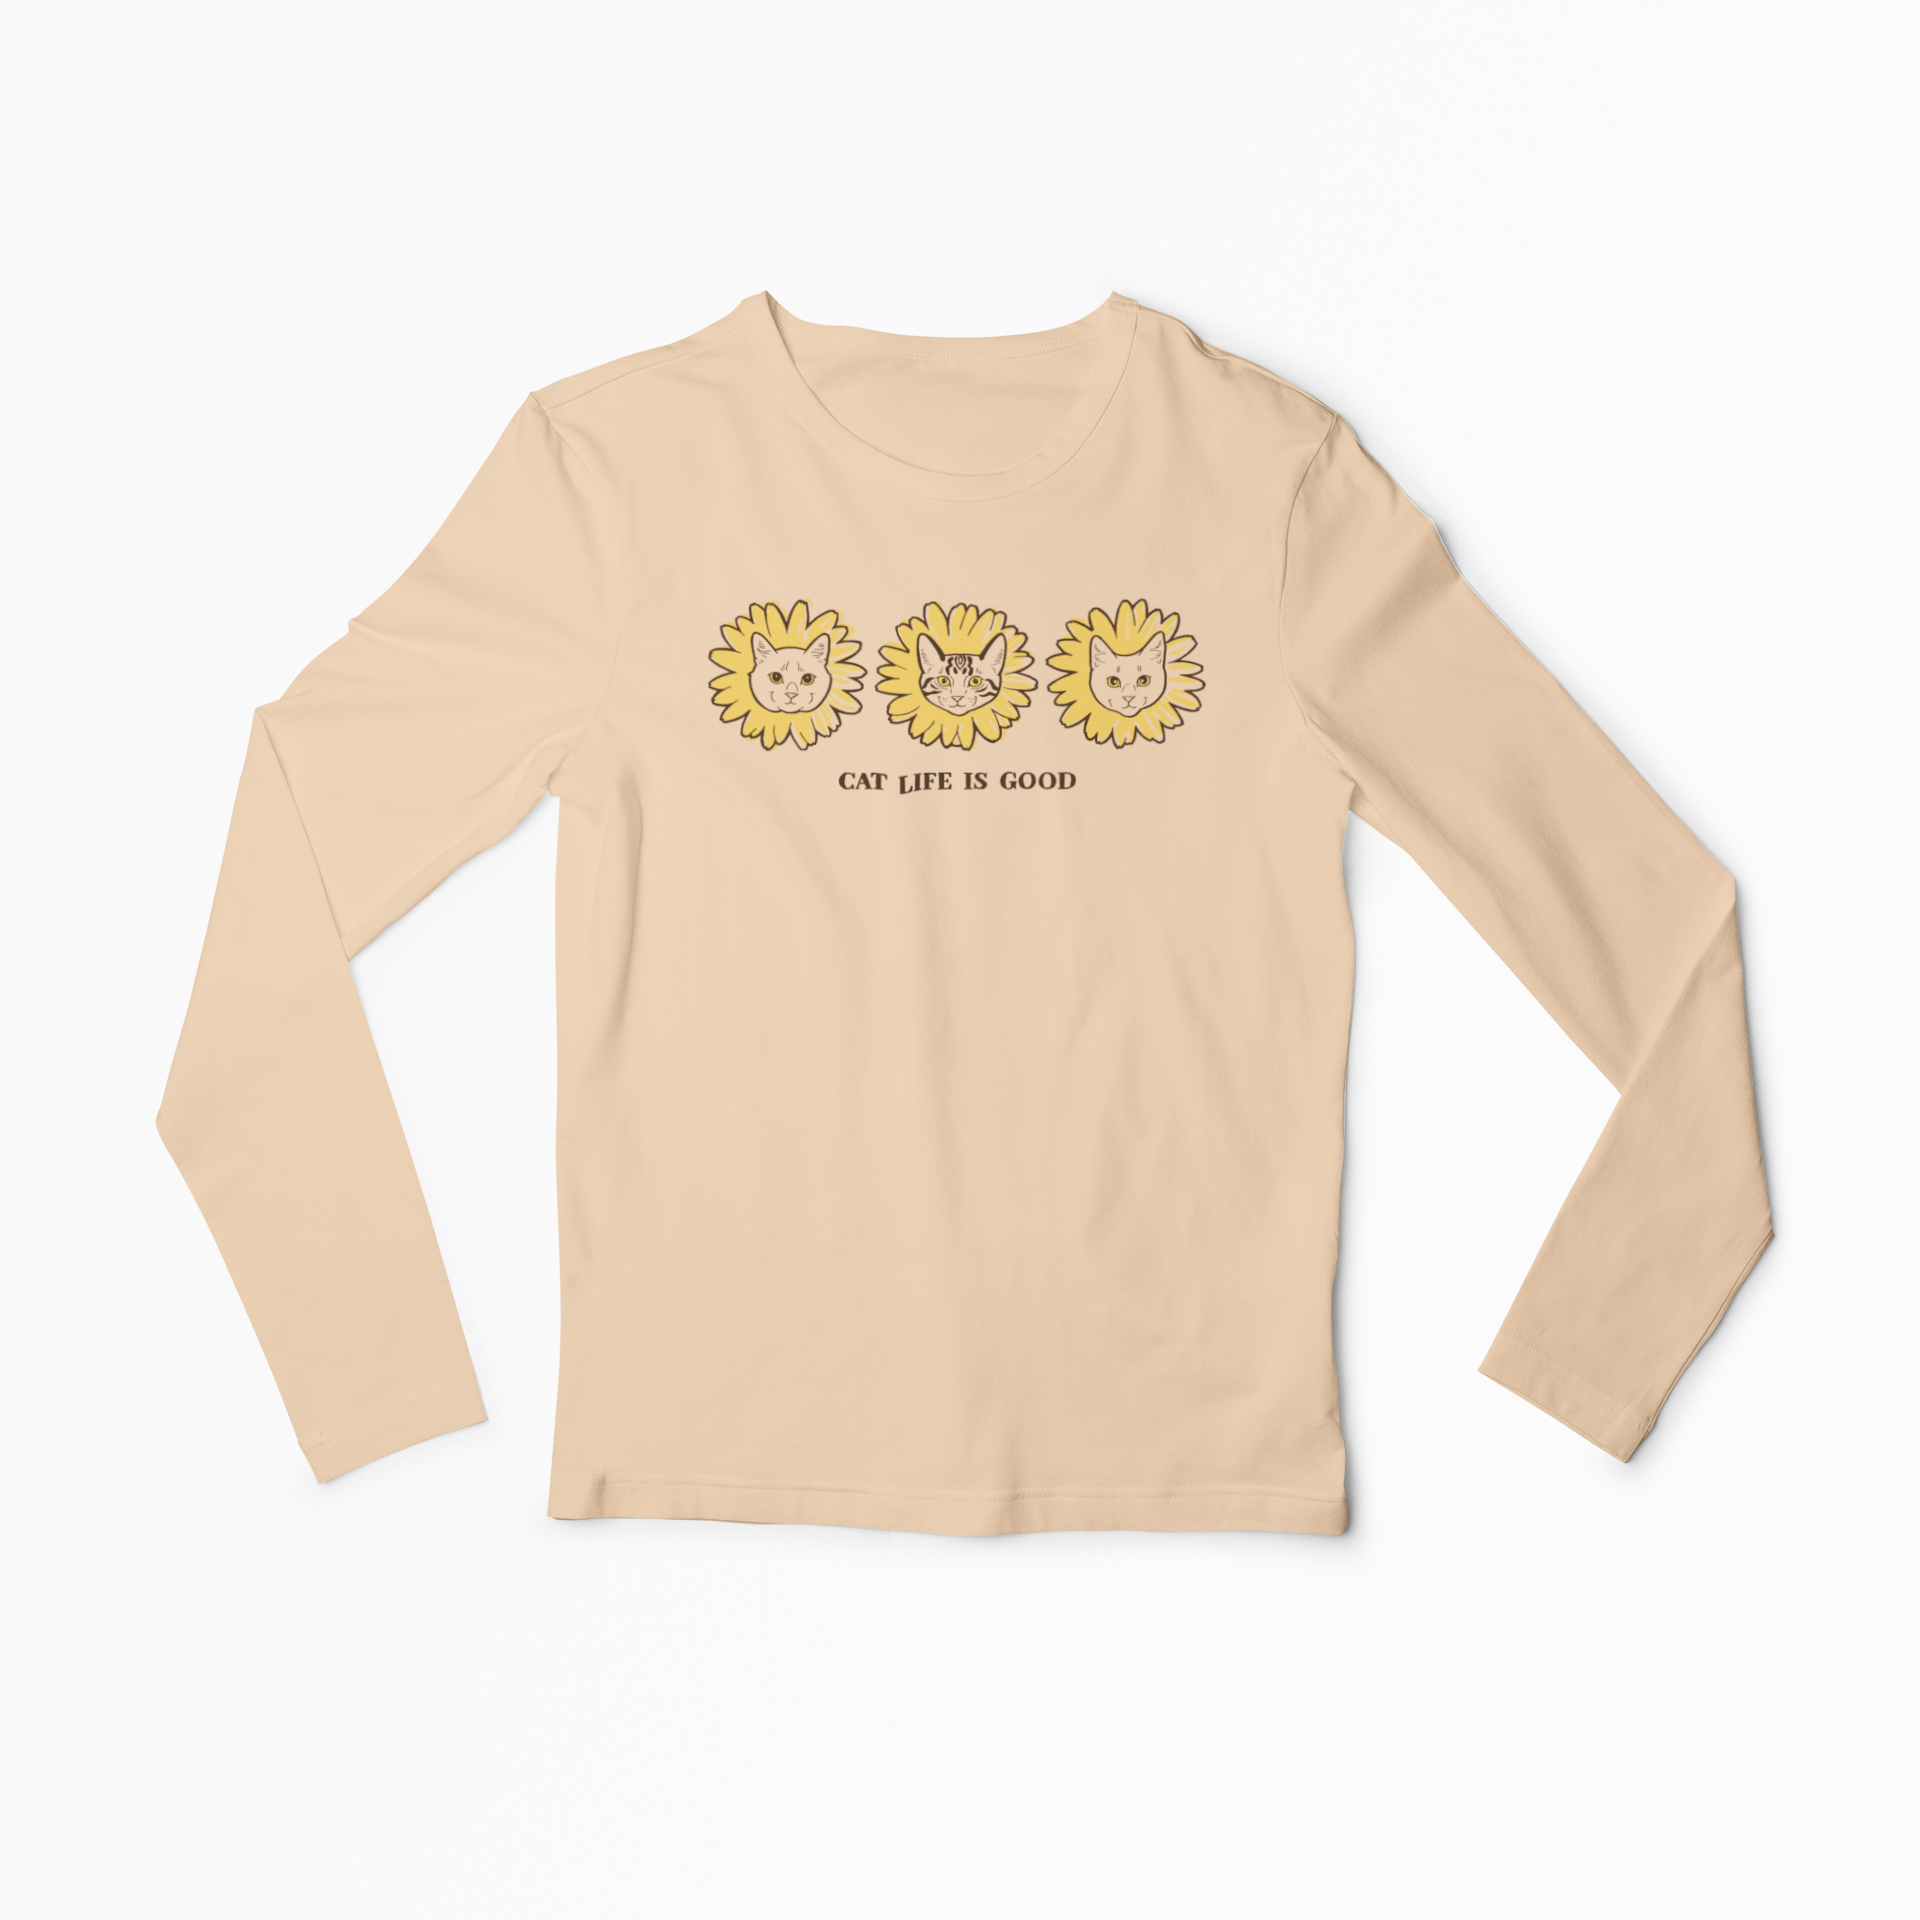 "Cat Life is Good" - Exclusive Limited Edition Cat Culture Unisex Long Sleeve Shirt by Megan Lynn Kott